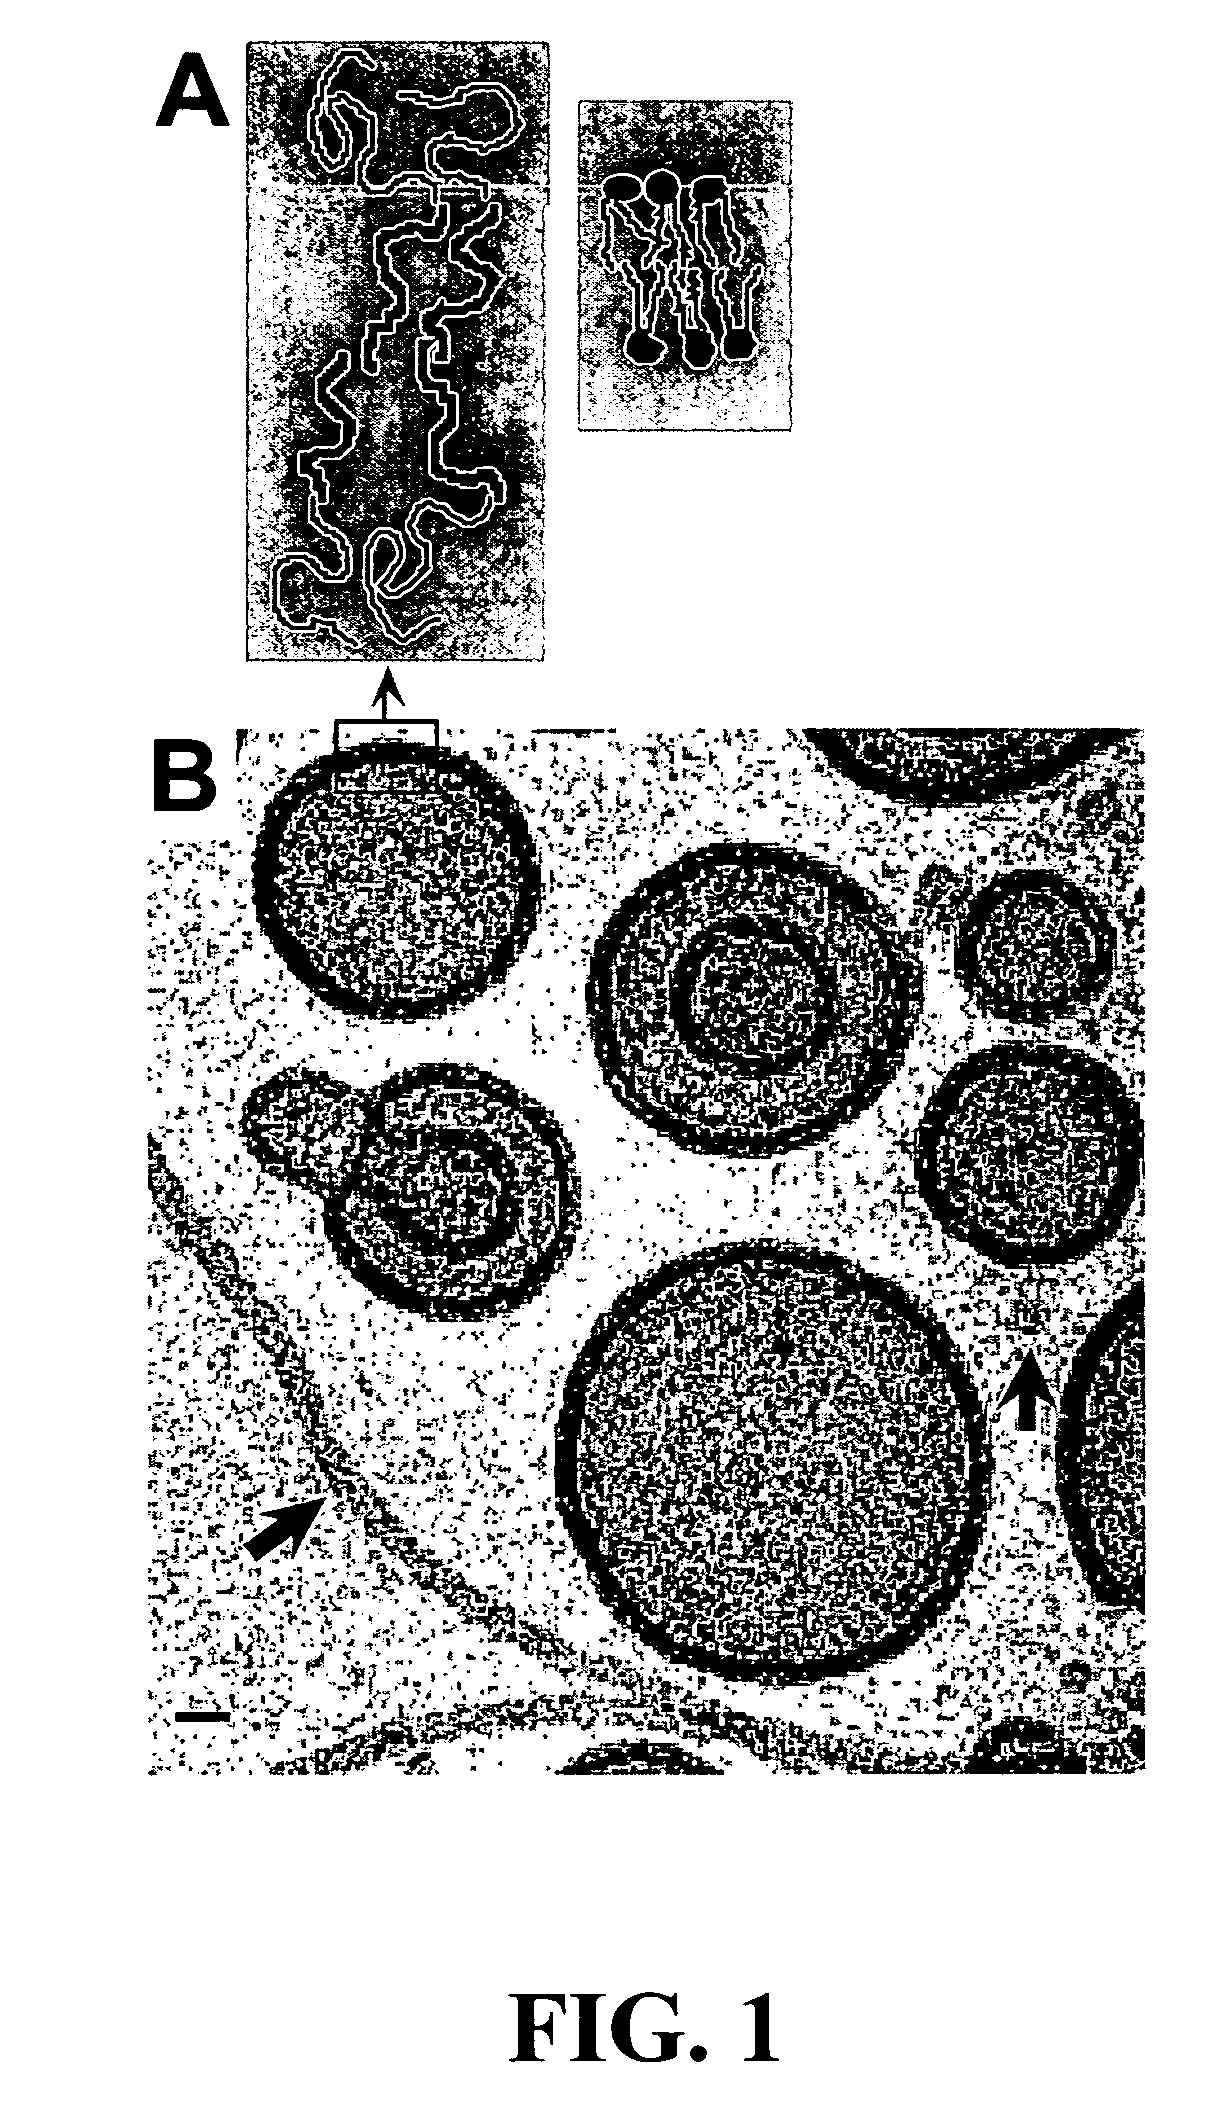 Polymersomes and related encapsulating membranes